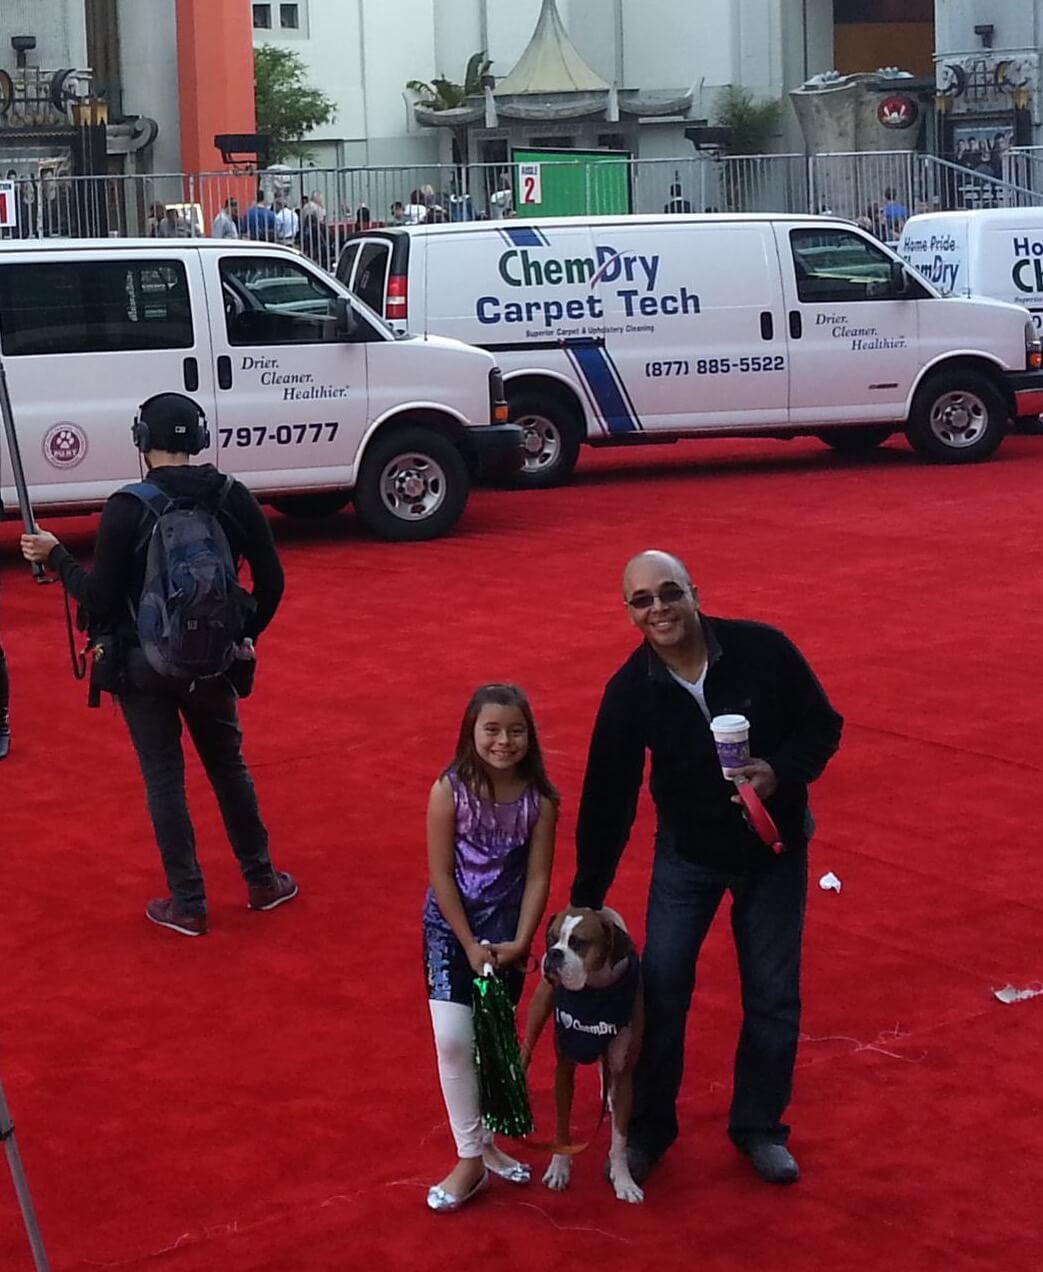 Chem-Dry Carpet Tech owner, Ed Ramia, cleaning the red carpet in Los Angeles